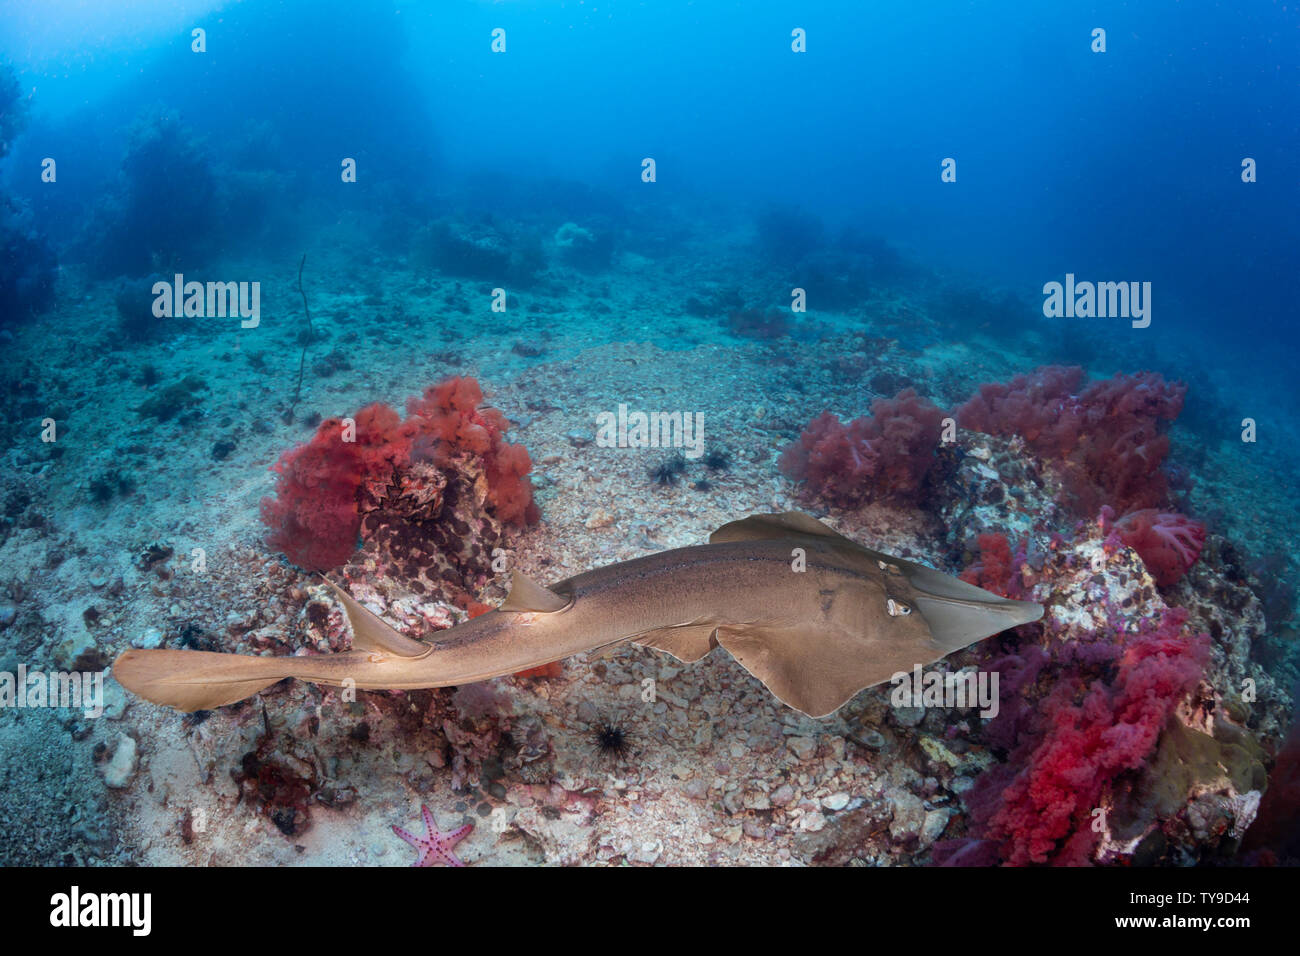 The common shovelnose ray, Glaucostegus typus, is also known as the giant shovelnose ray, Great Northern Shovelnose or giant guitarfish, Indonesia. Th Stock Photo